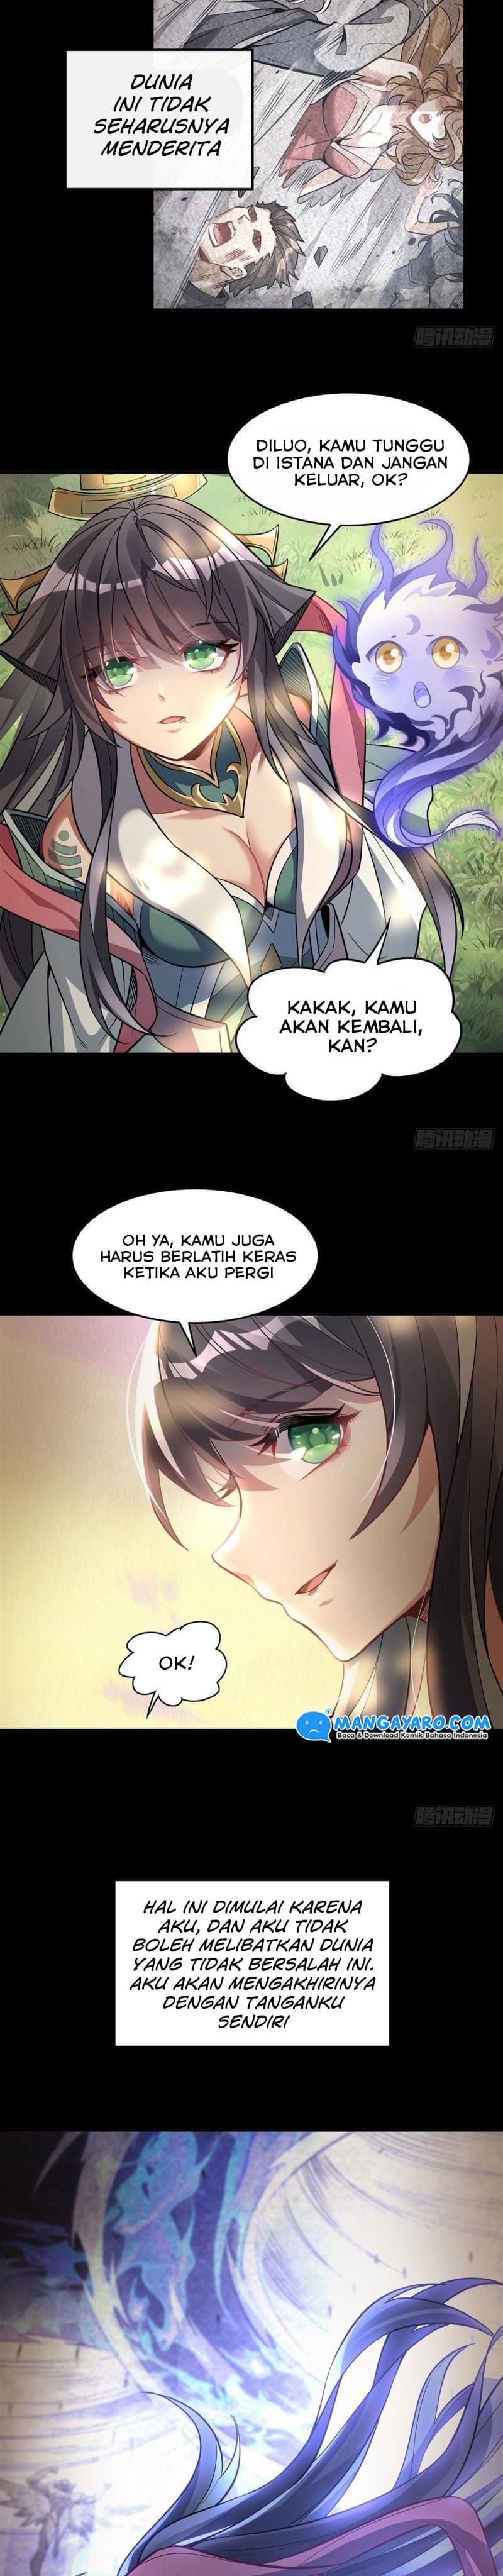 Dilarang COPAS - situs resmi www.mangacanblog.com - Komik my female apprentices are all big shots from the future 059 - chapter 59 60 Indonesia my female apprentices are all big shots from the future 059 - chapter 59 Terbaru 11|Baca Manga Komik Indonesia|Mangacan